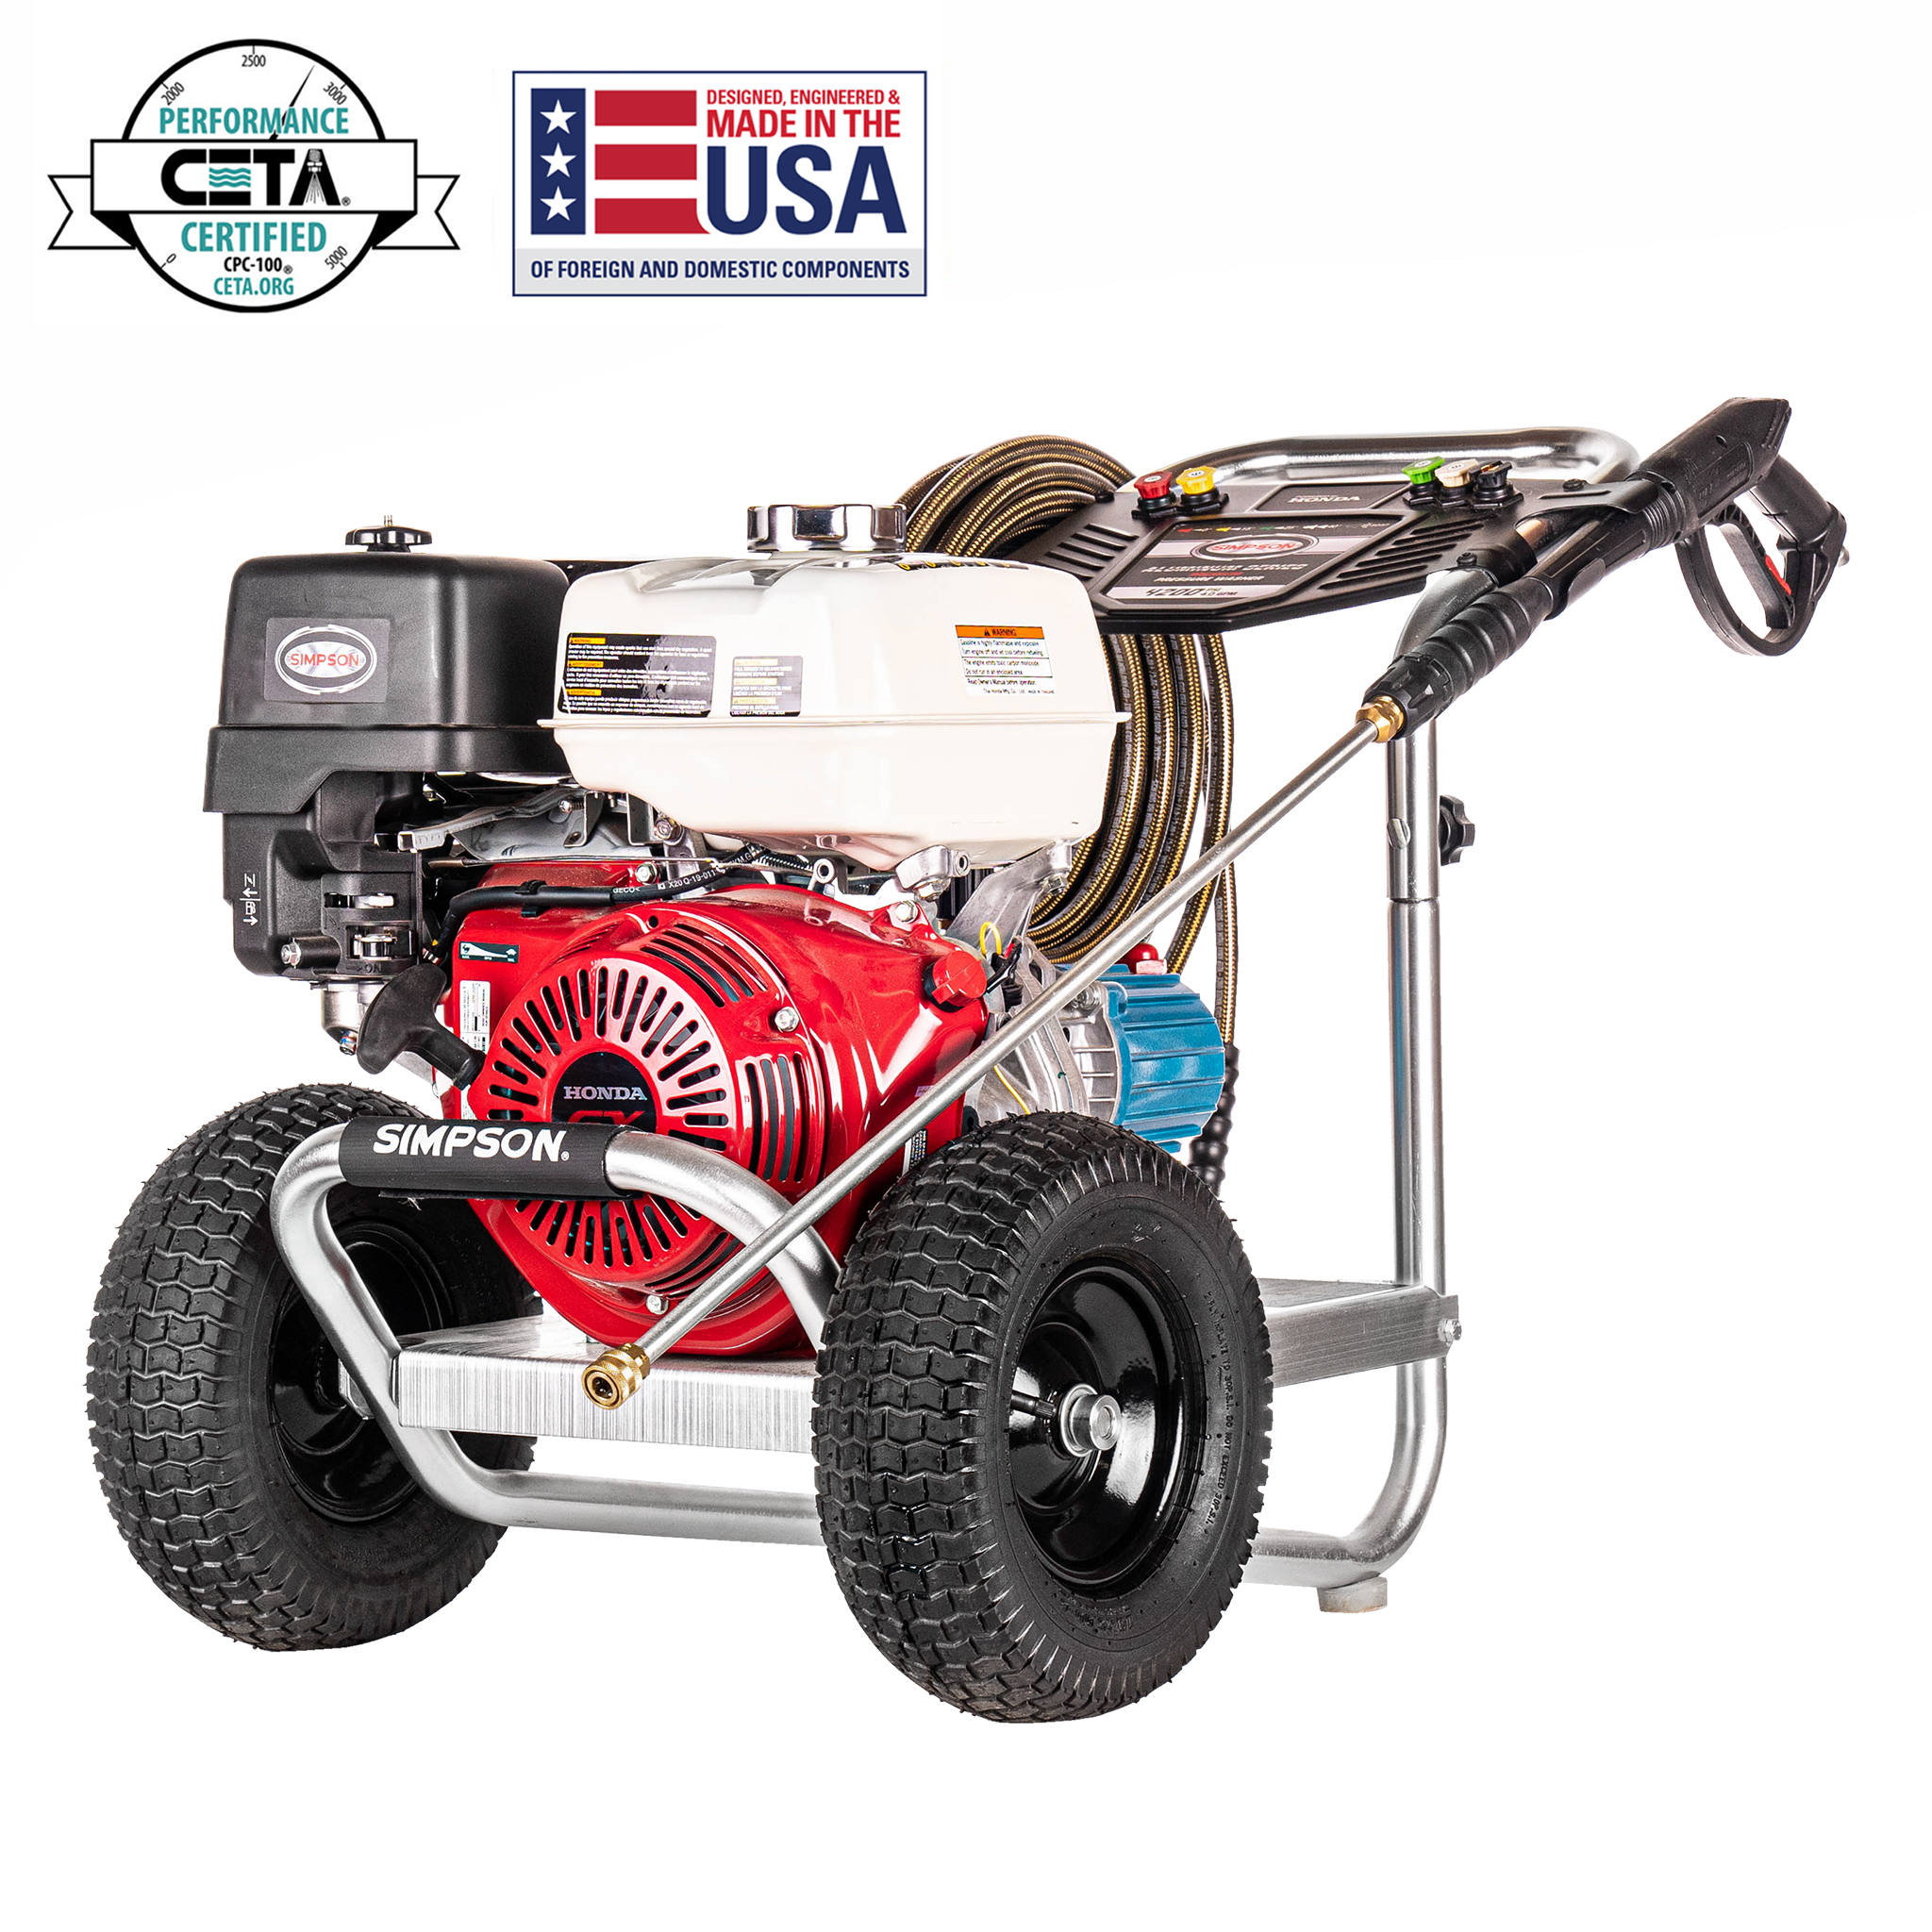 SIMPSON Cleaning ALH4240 Aluminum Gas Pressure Washer Powered by Honda GX390 4200 PSI @ 4.0 GPM Red 